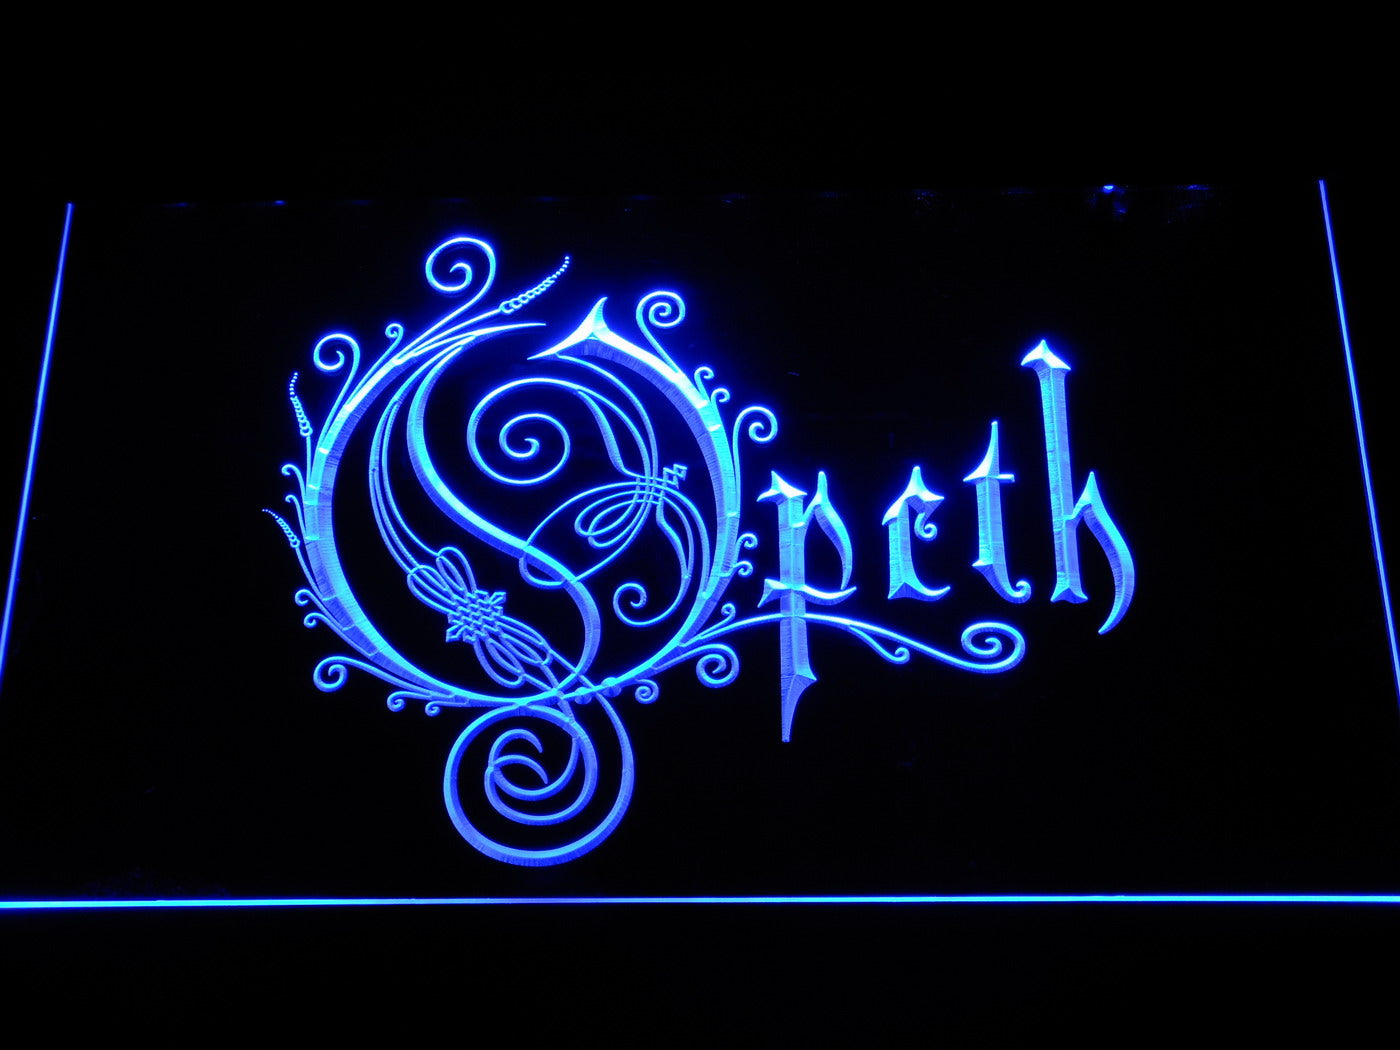 Opeth Heavy Metal Band Neon LED Light Sign